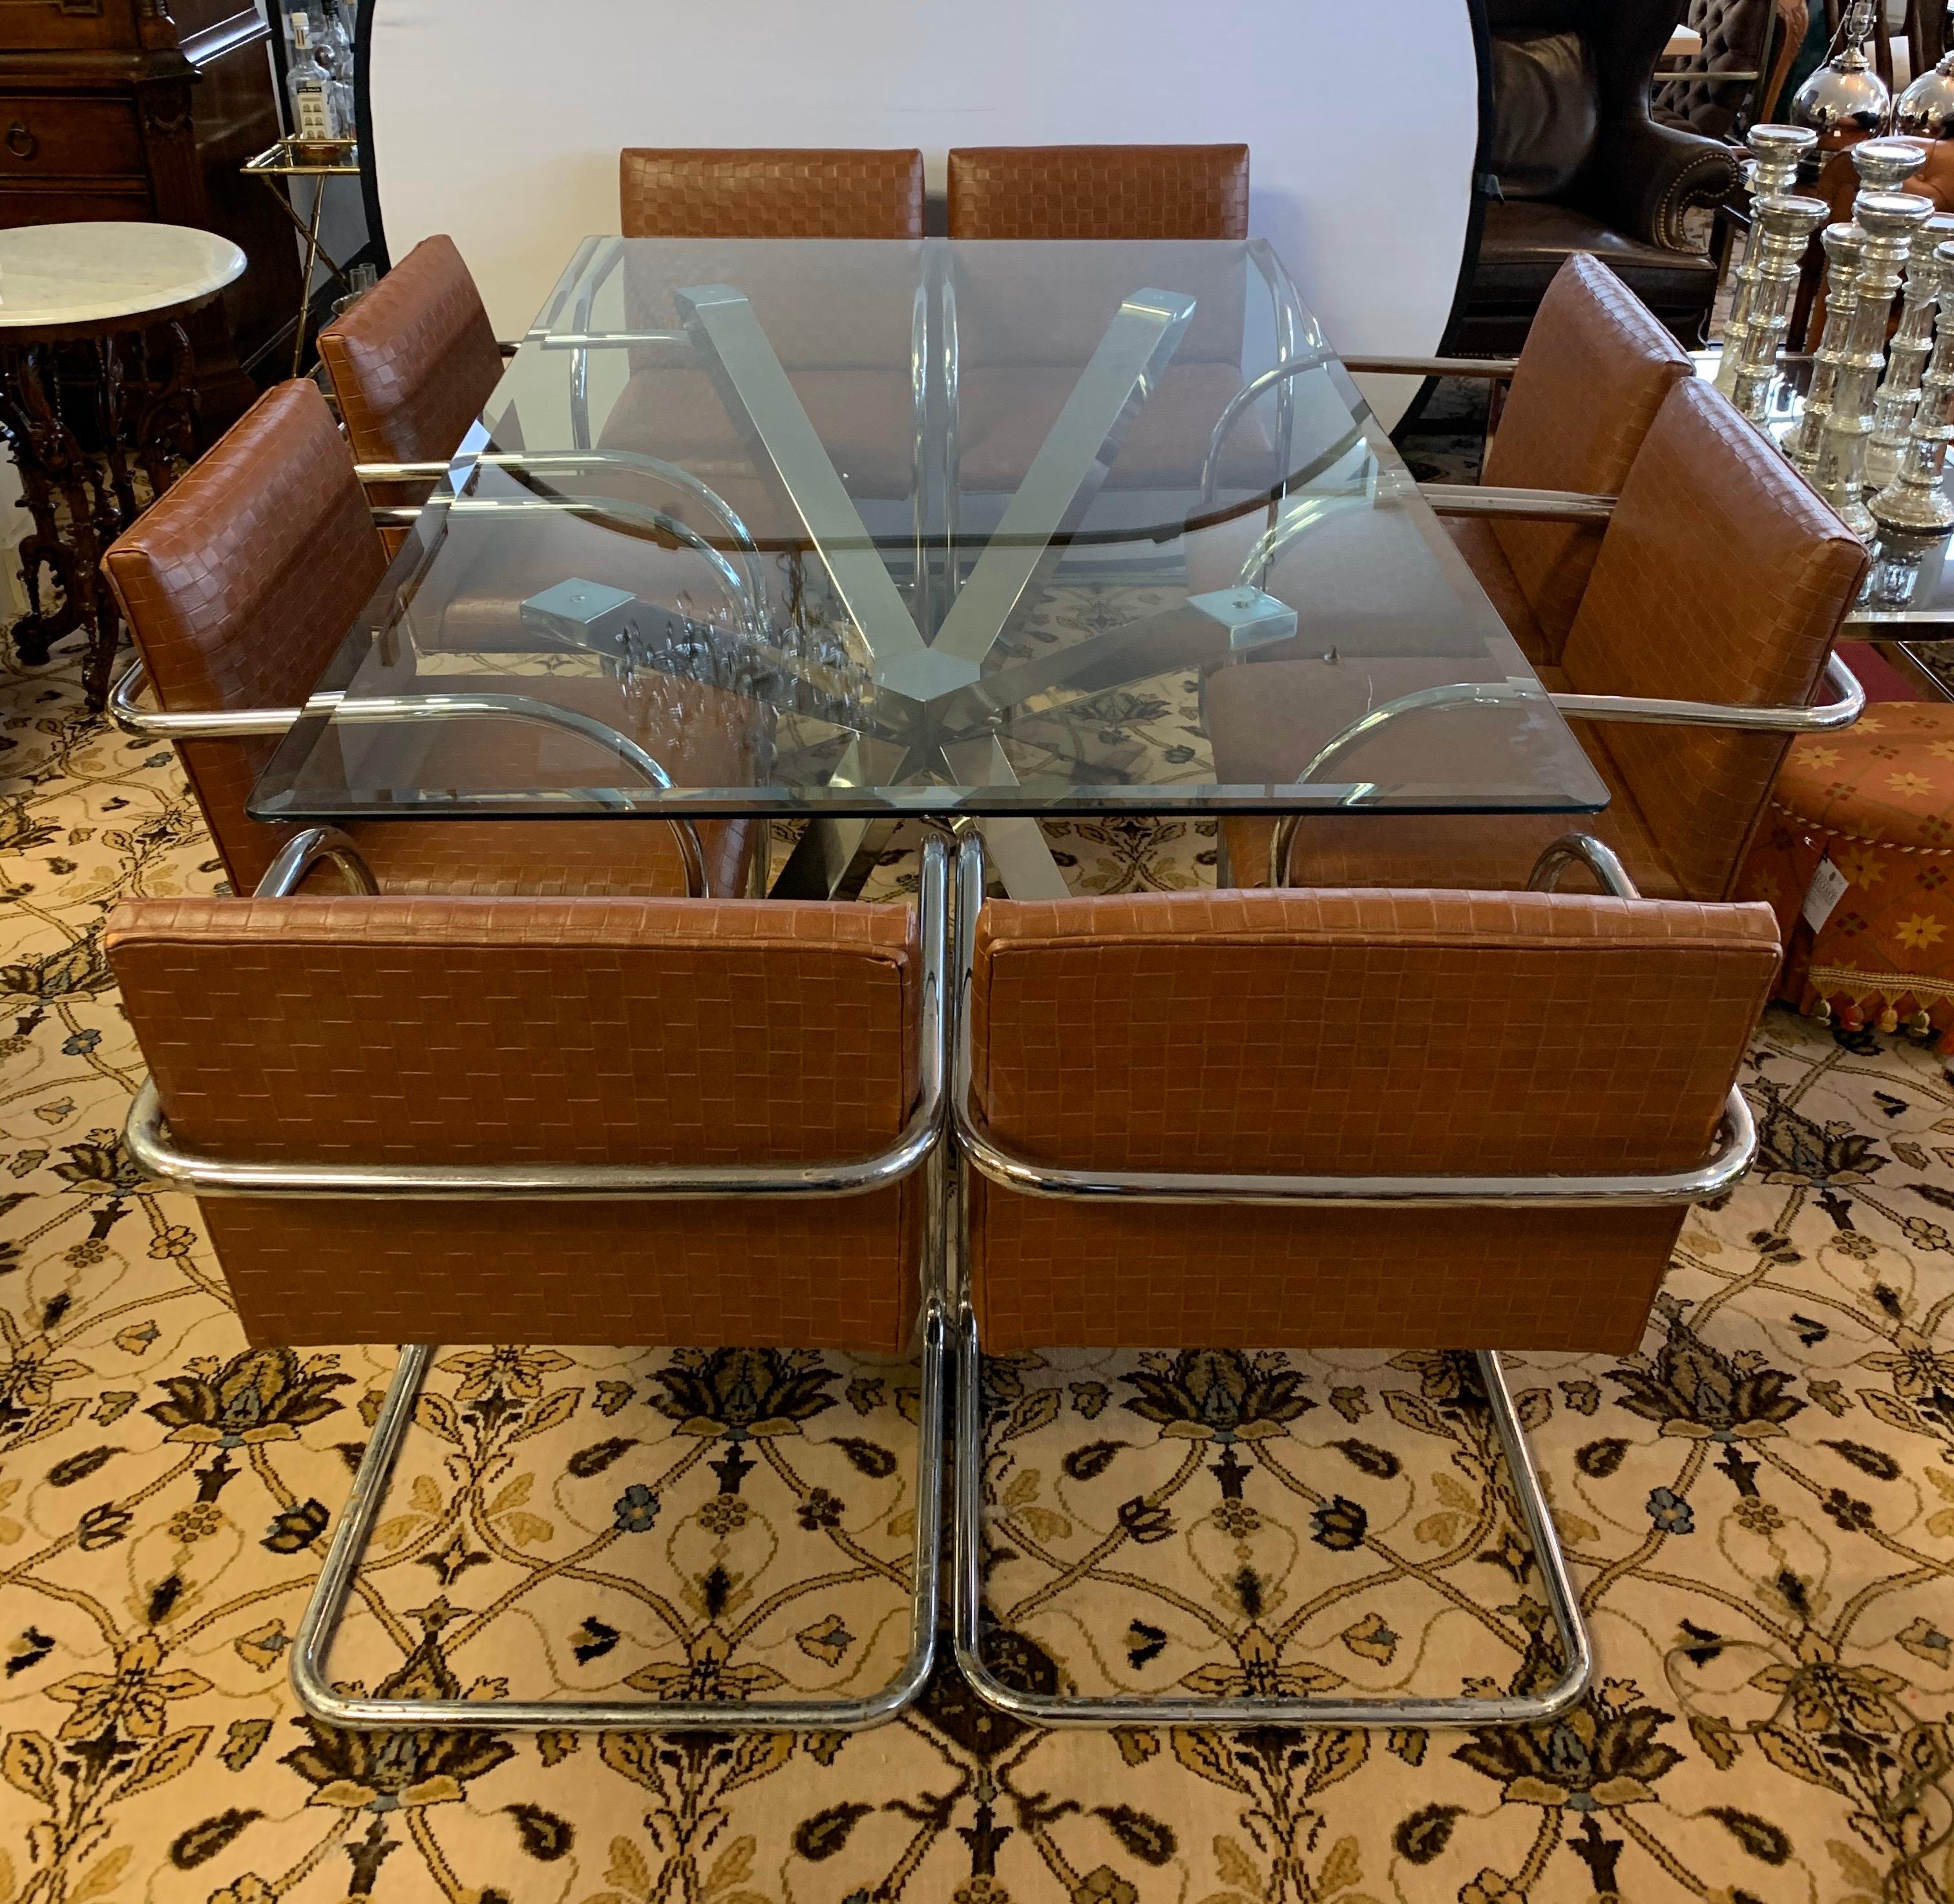 Milo Baughman style dining room set includes a set of eight leather and chrome cantilever chairs
that are from the 1970s and a more recent glass top dining table that sits atop a silver chrome X-base
base. The table is circa 21st century and is in